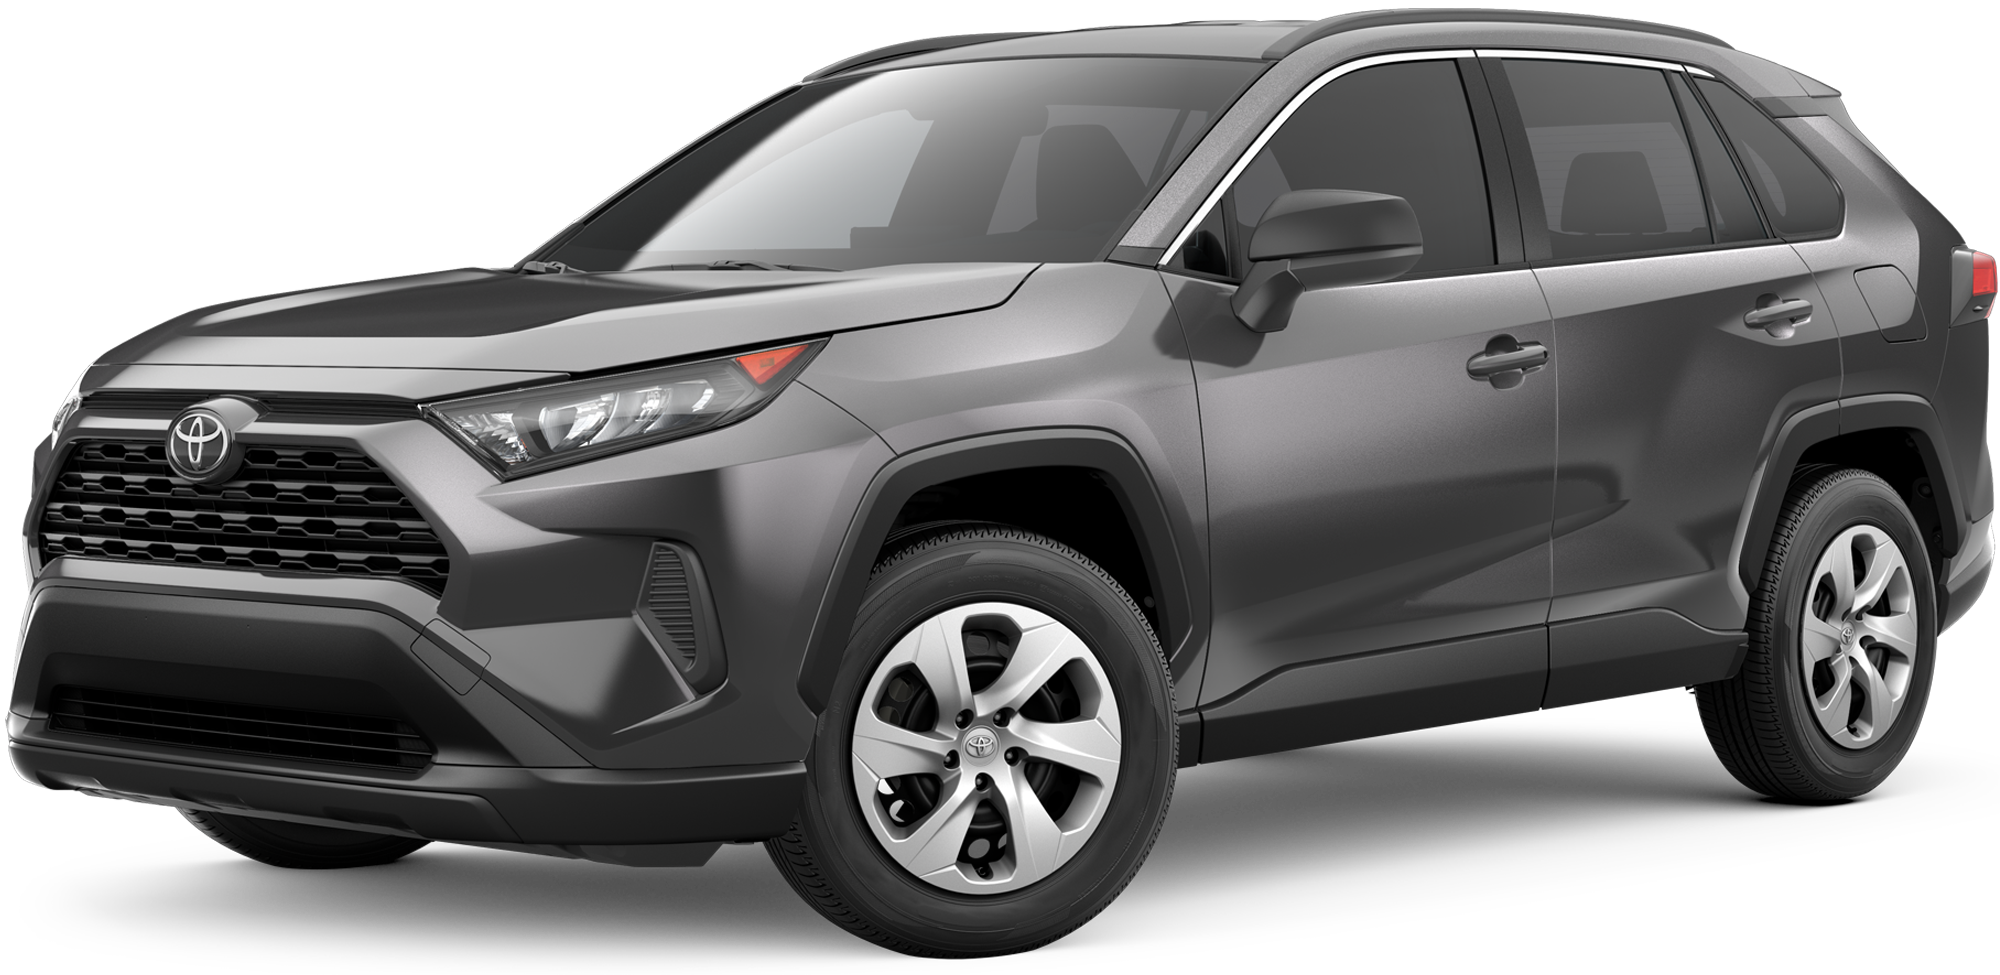 Toyota SUV Overview Handy Toyota Serving Greater Burlington and St